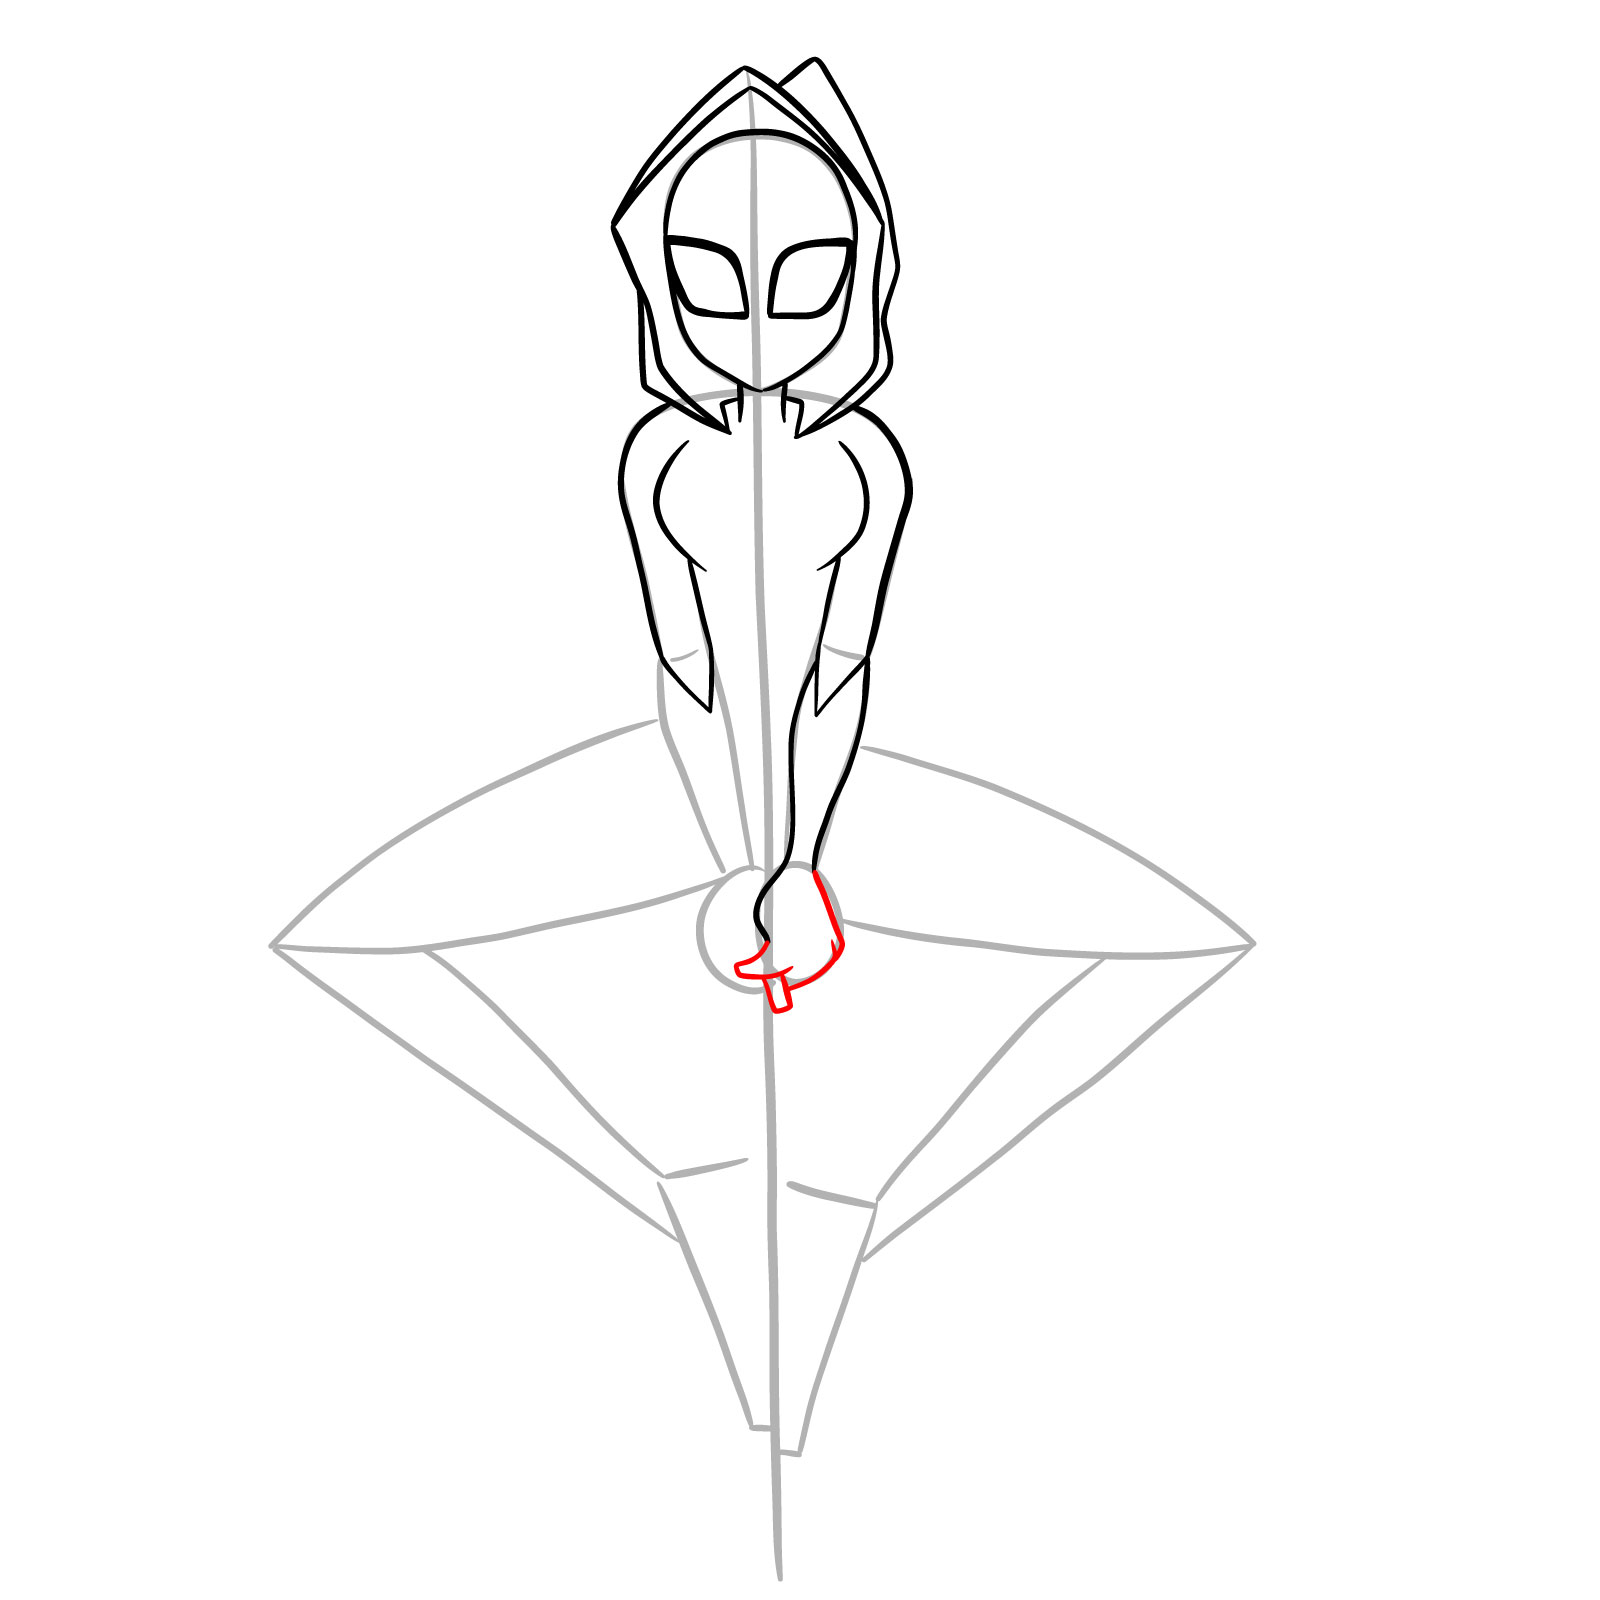 How to draw Spider-Gwen hanging on a web - step 17